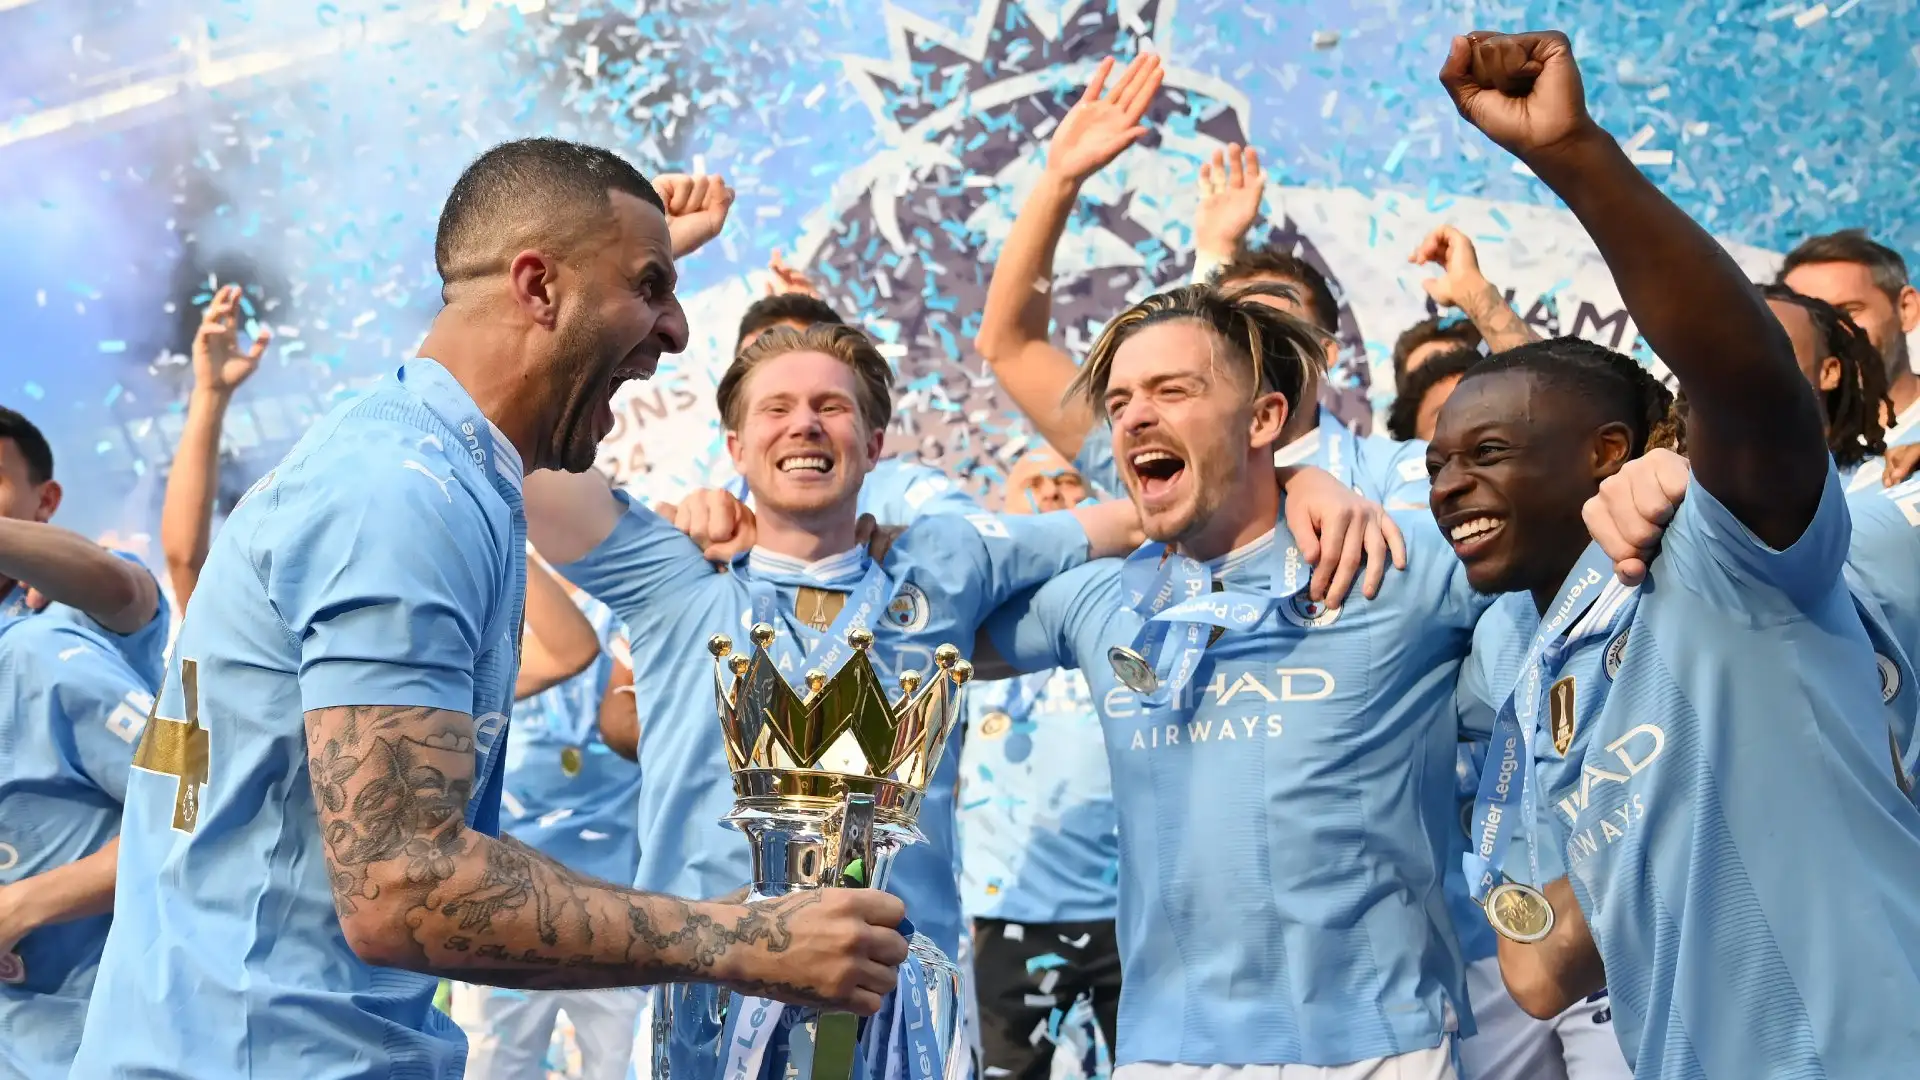 'Manchester City are about to take down the entire Premier League cartel' - Fans react to Cityzens launching legal action against sponsorship rules